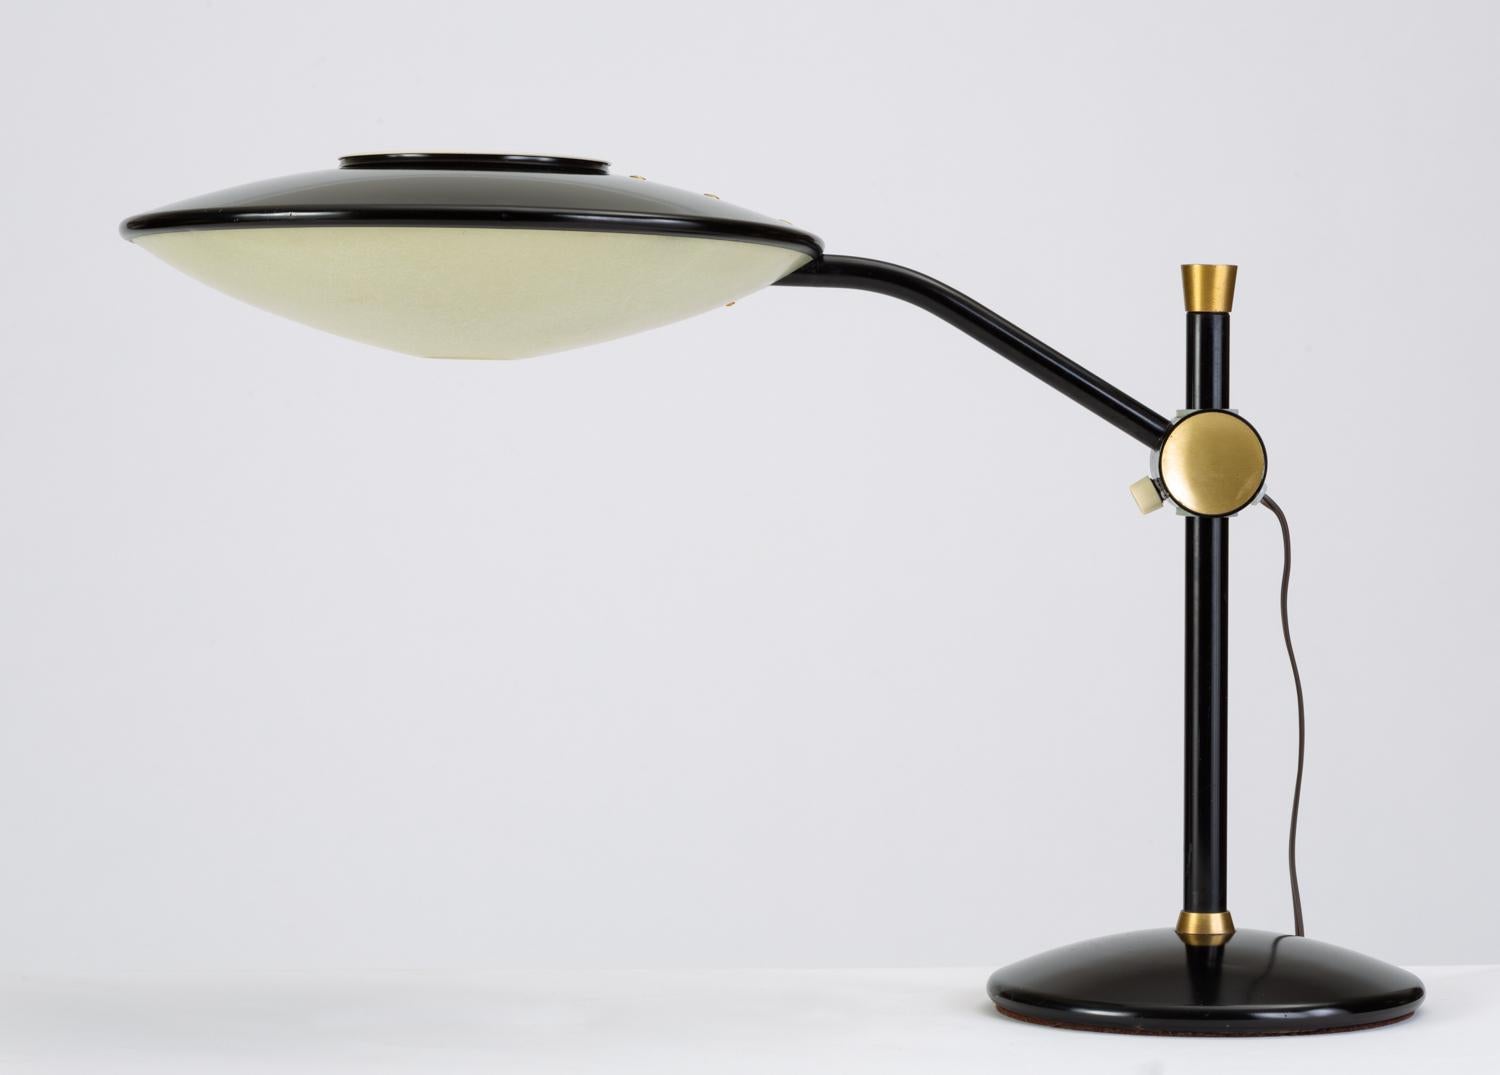 North American Black-Enameled Desk Lamp with Brass Accents by Dazor